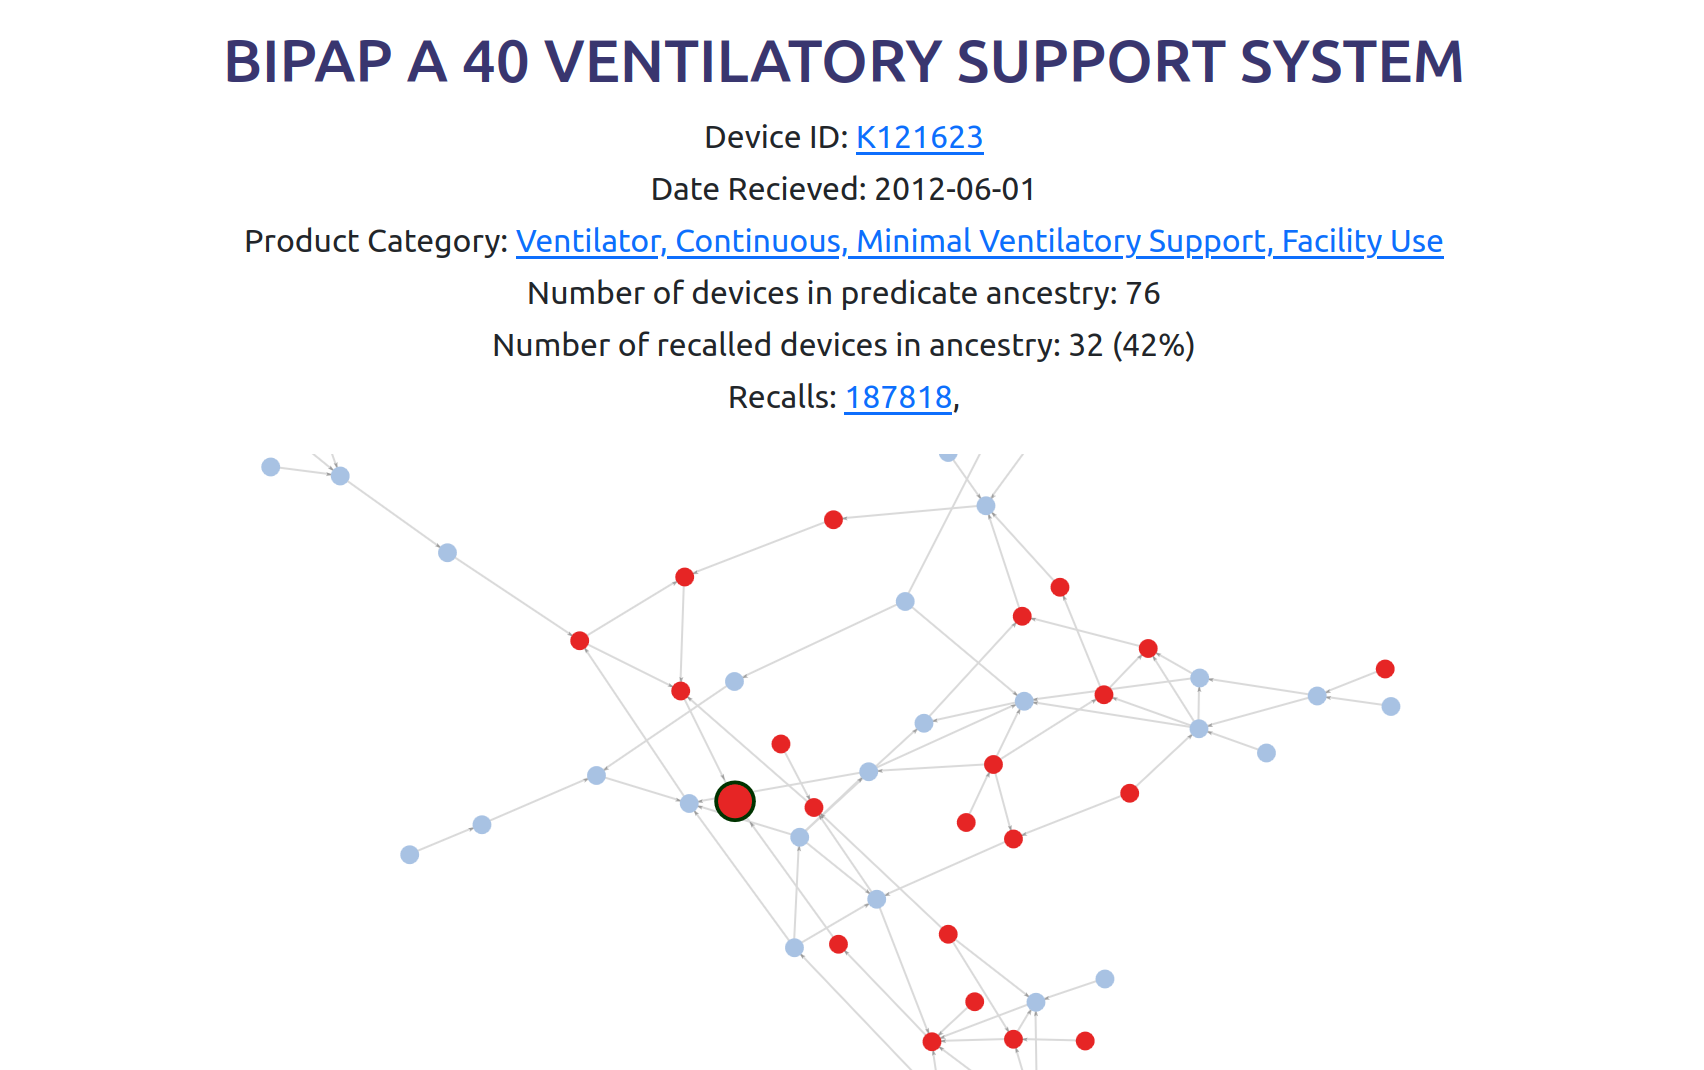 Screenshot of a graph visualization of a medical device